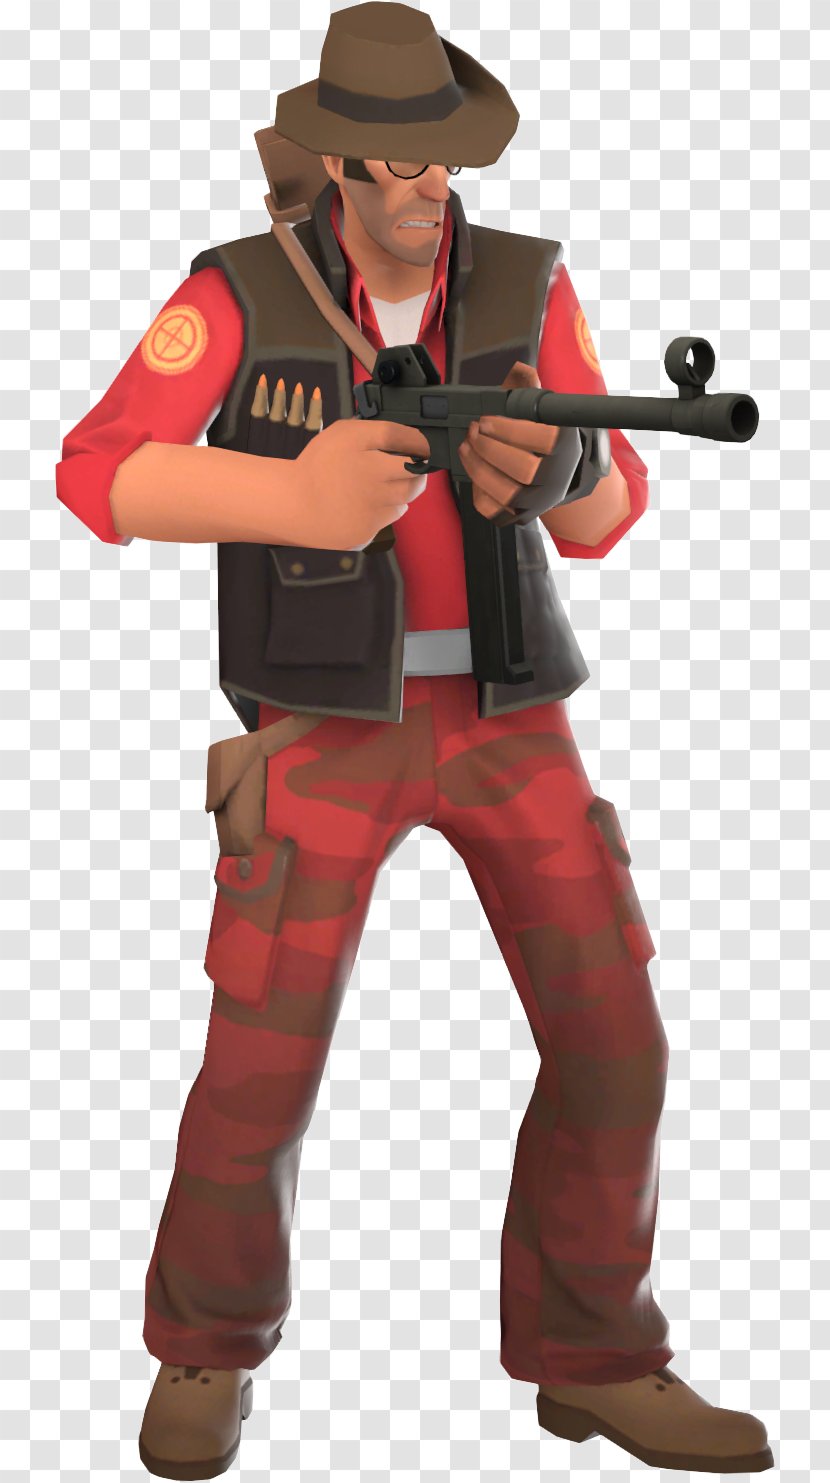 Team Fortress 2 Cammy Loadout Pajamas Military Camouflage - Costume Transparent PNG